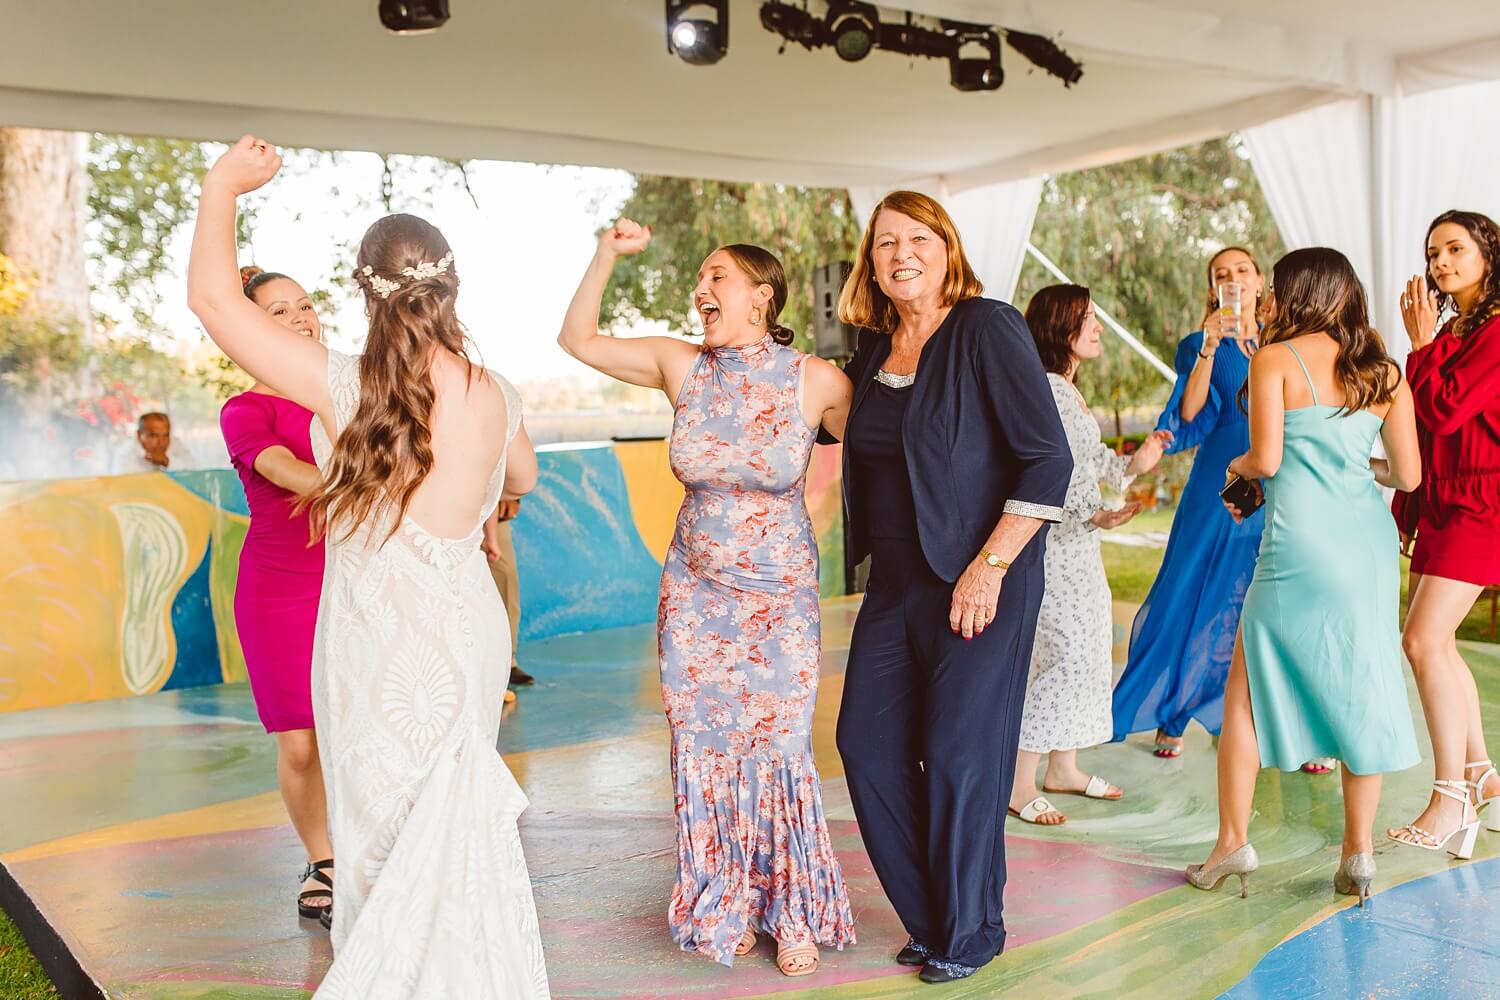 Bride dancing with wedding guests at destination wedding | Brooke Michelle Photo